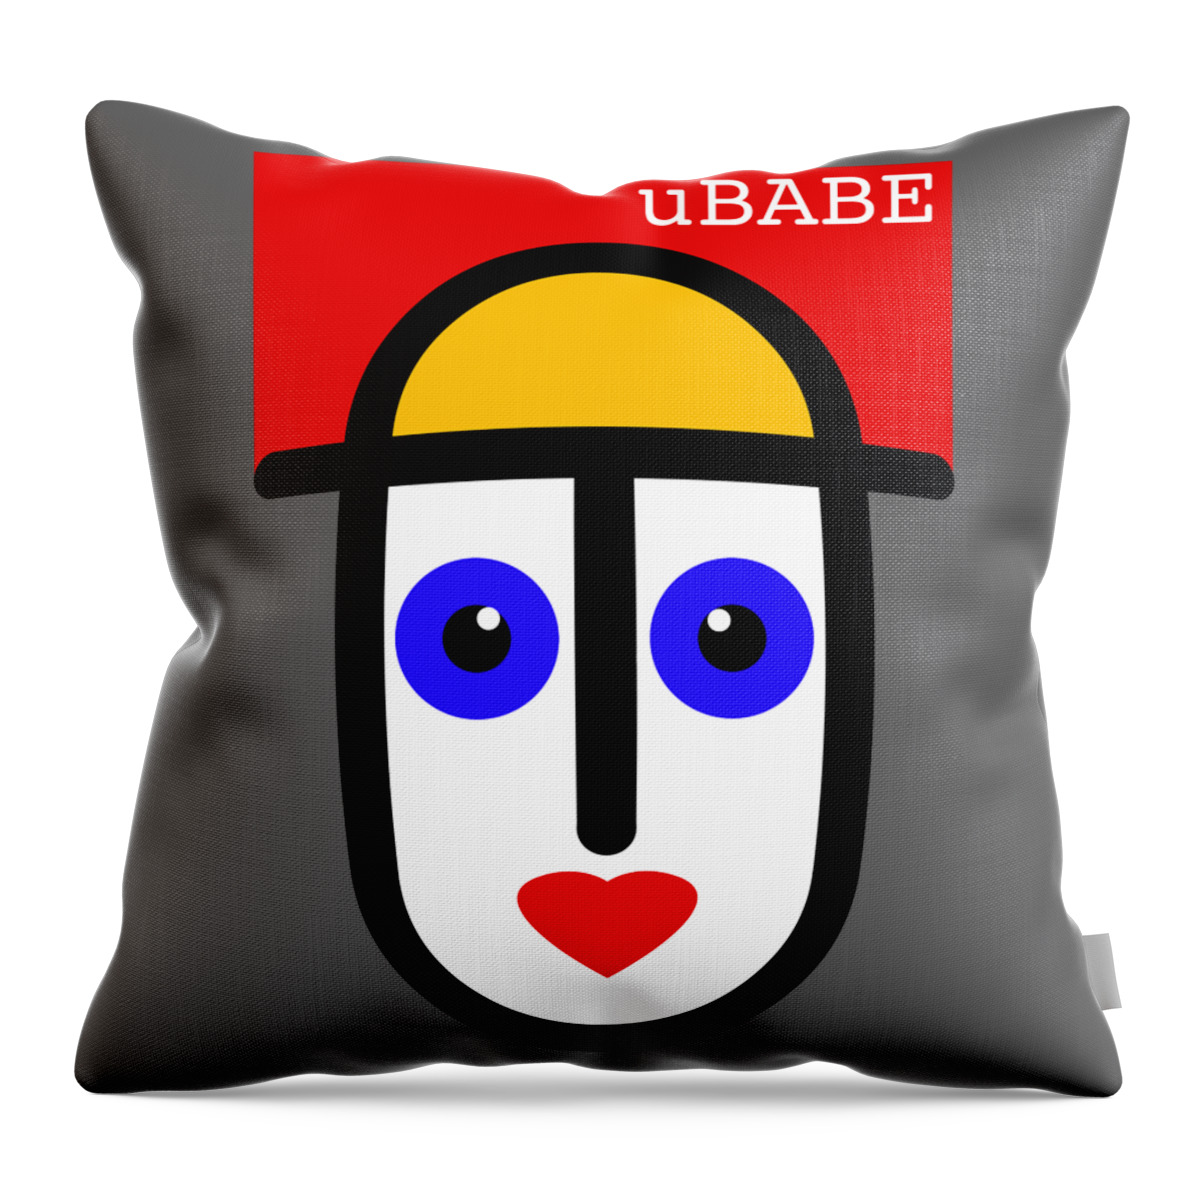 Lover Boy Throw Pillow featuring the digital art Lover Boy by Ubabe Style